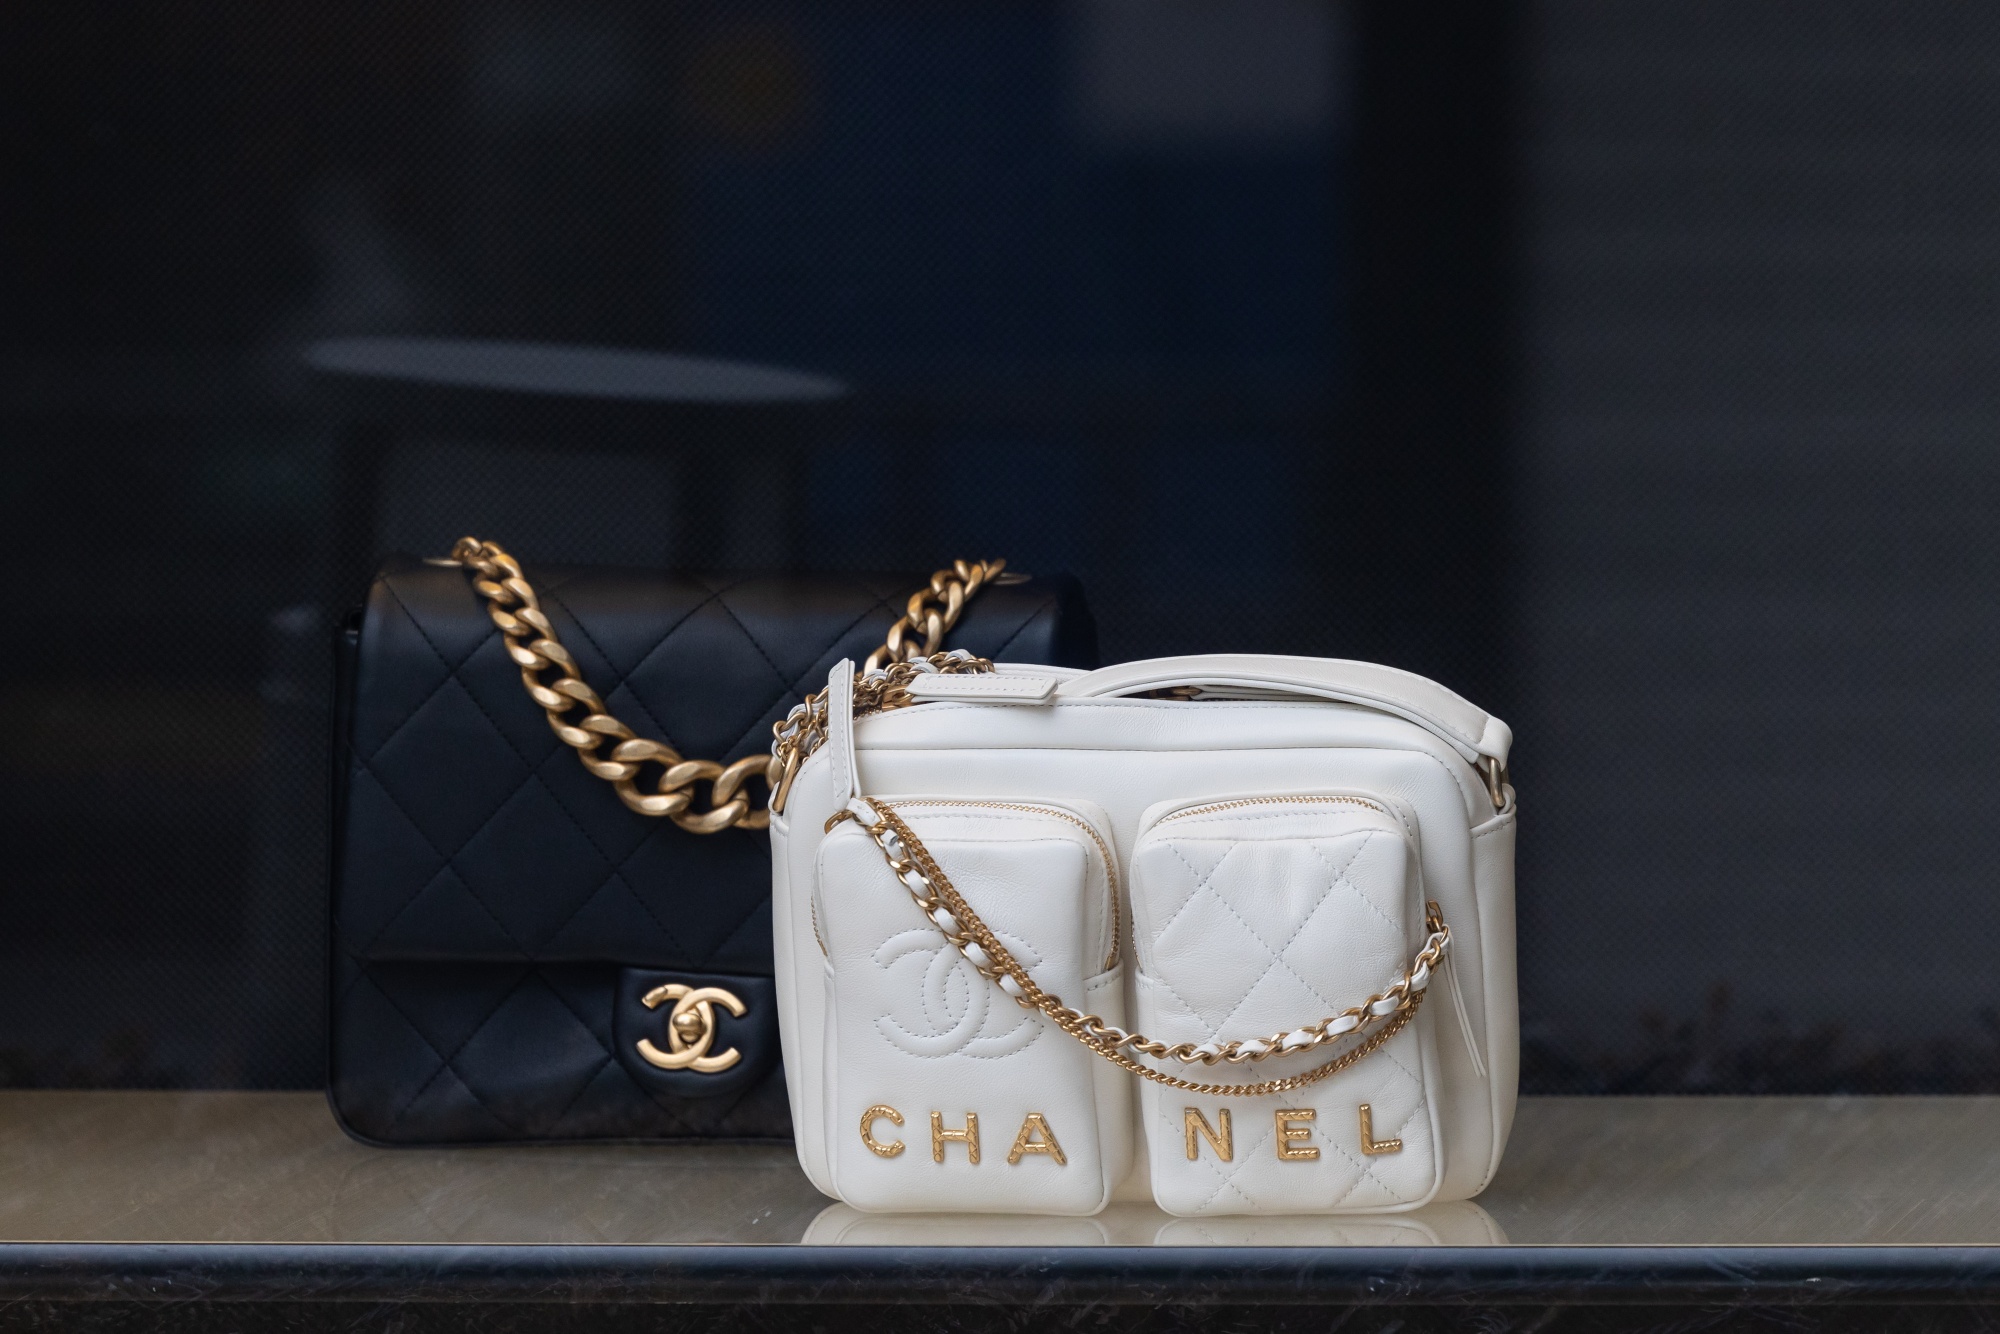 Chanel owners get $5 billion in dividends as sales of luxury goods